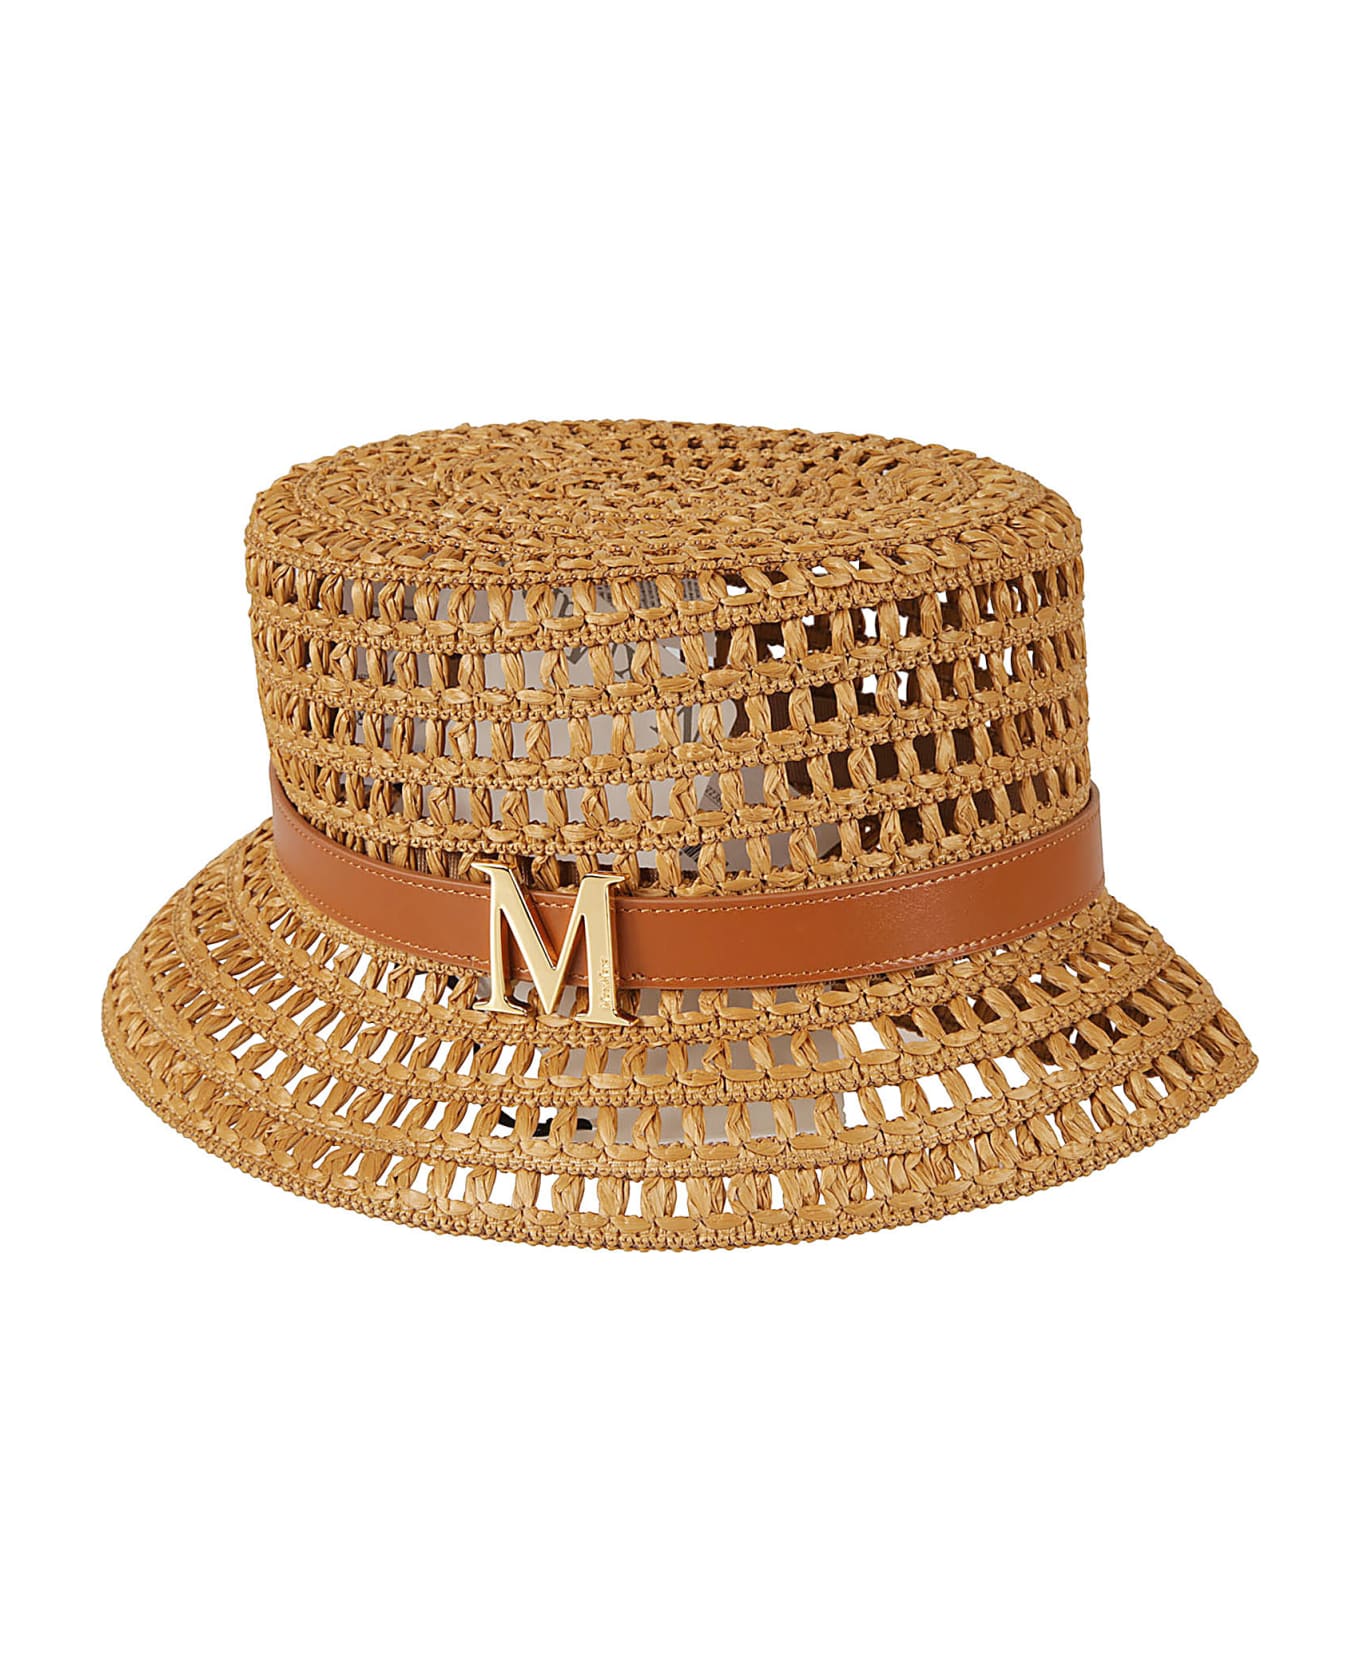 Max Mara Logo Plaque Perforated Woven Hat - BROWN 帽子